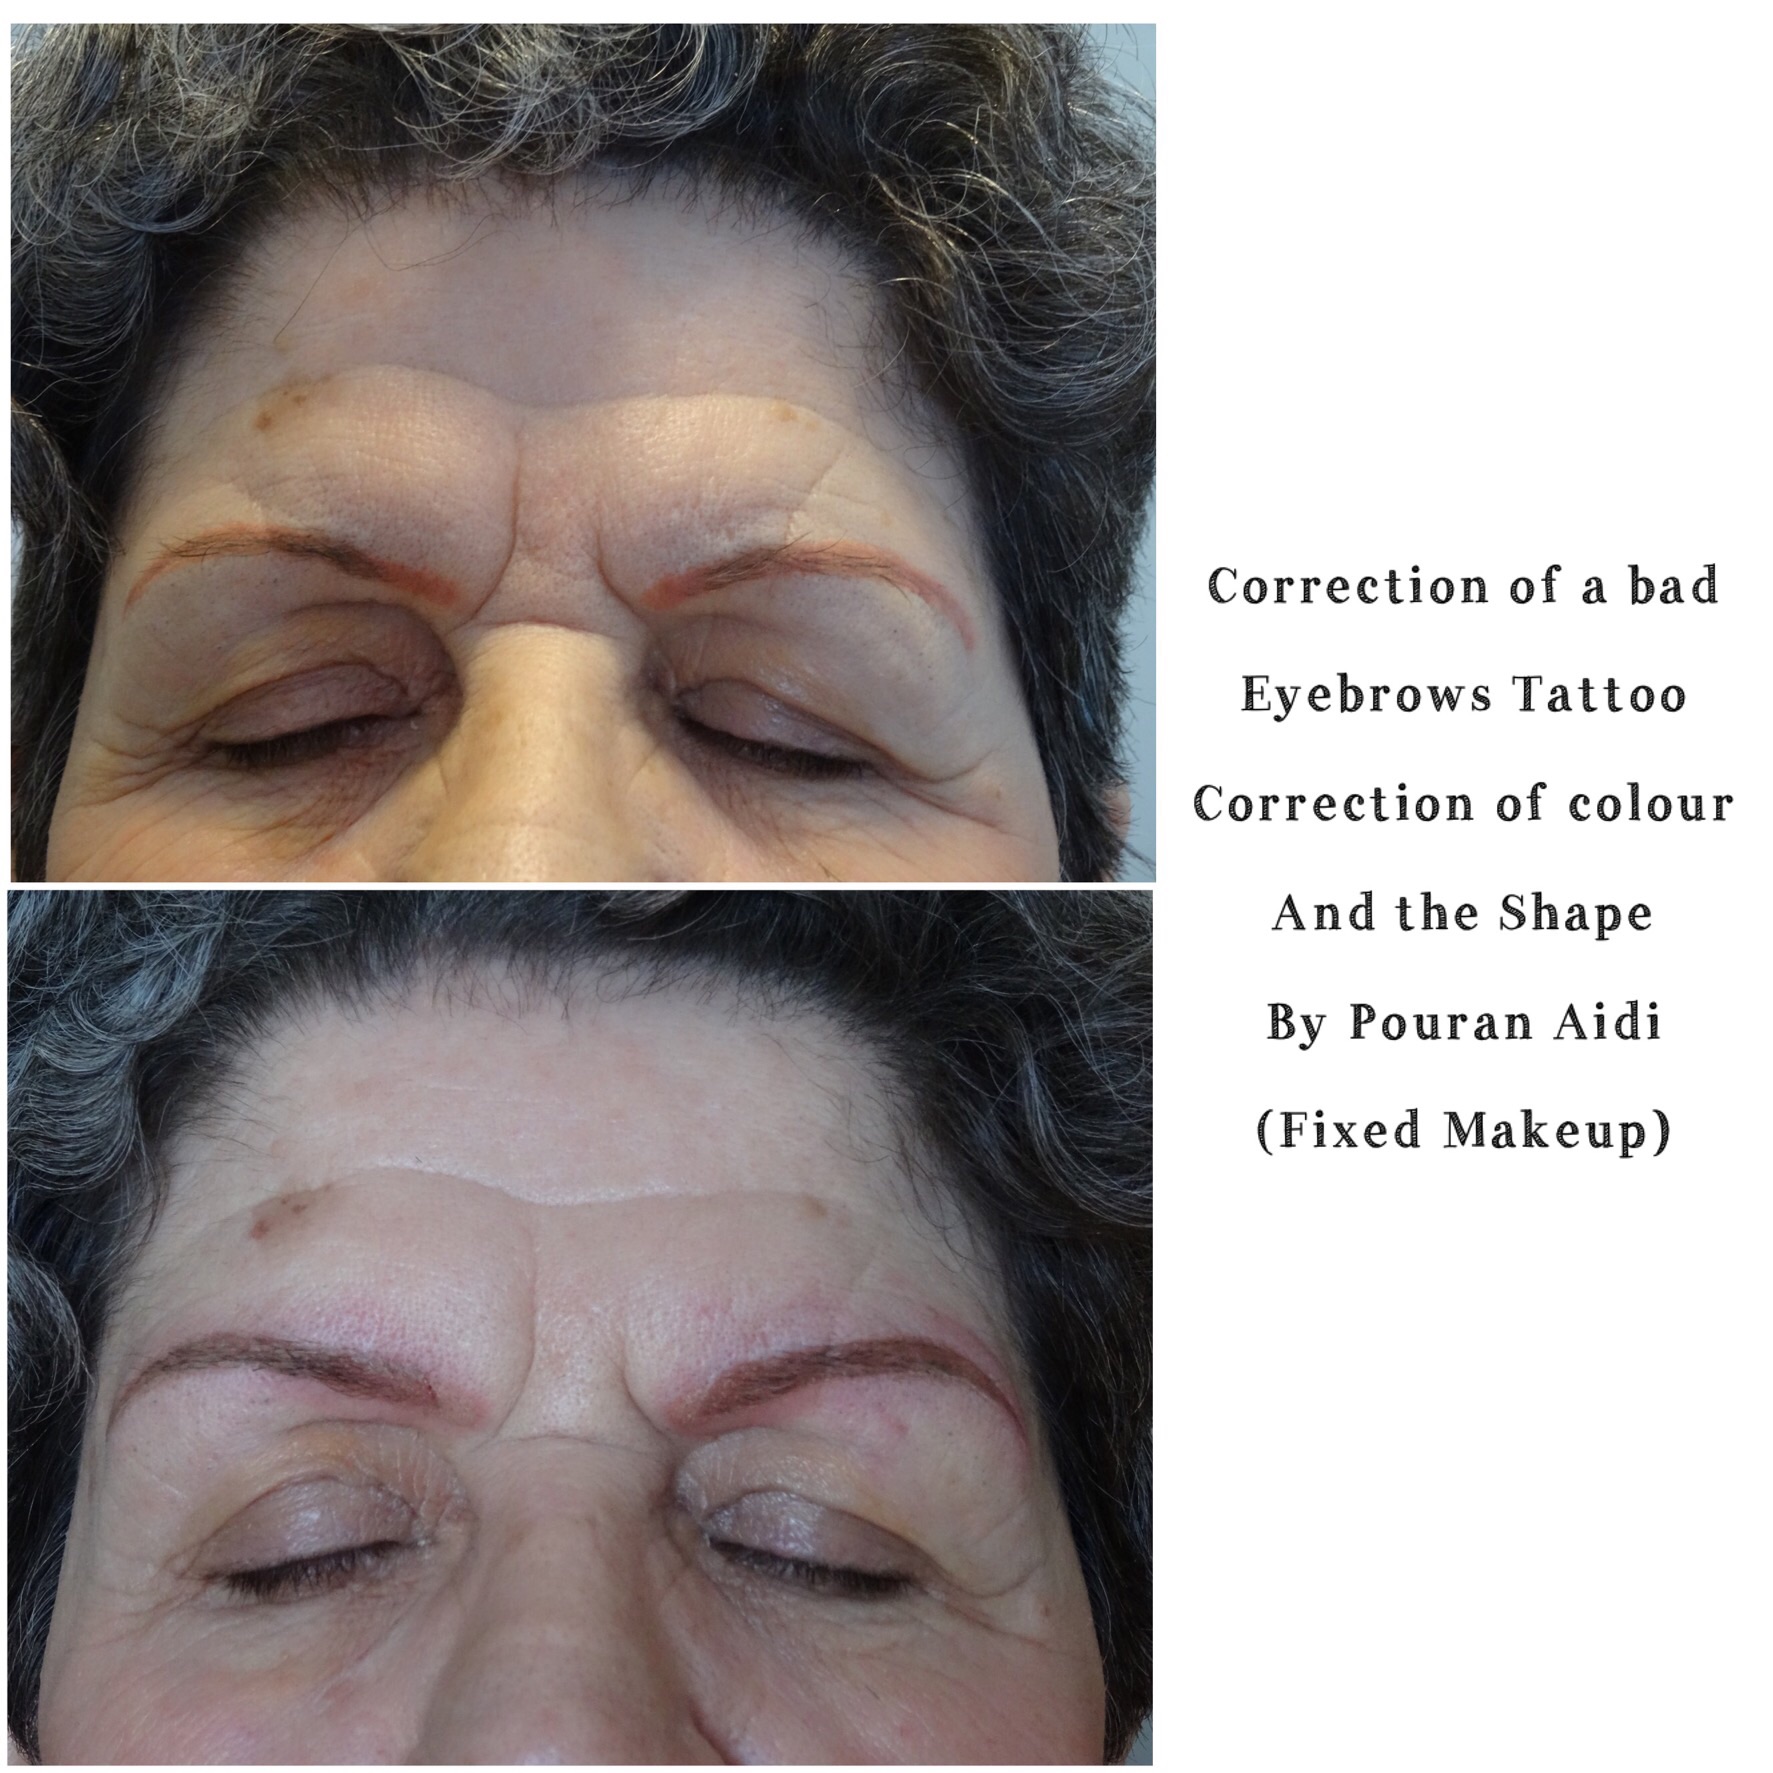 Fixing a Bad-shaped Eyebrow Tattoos or Colour Correction - Fixed Makeup